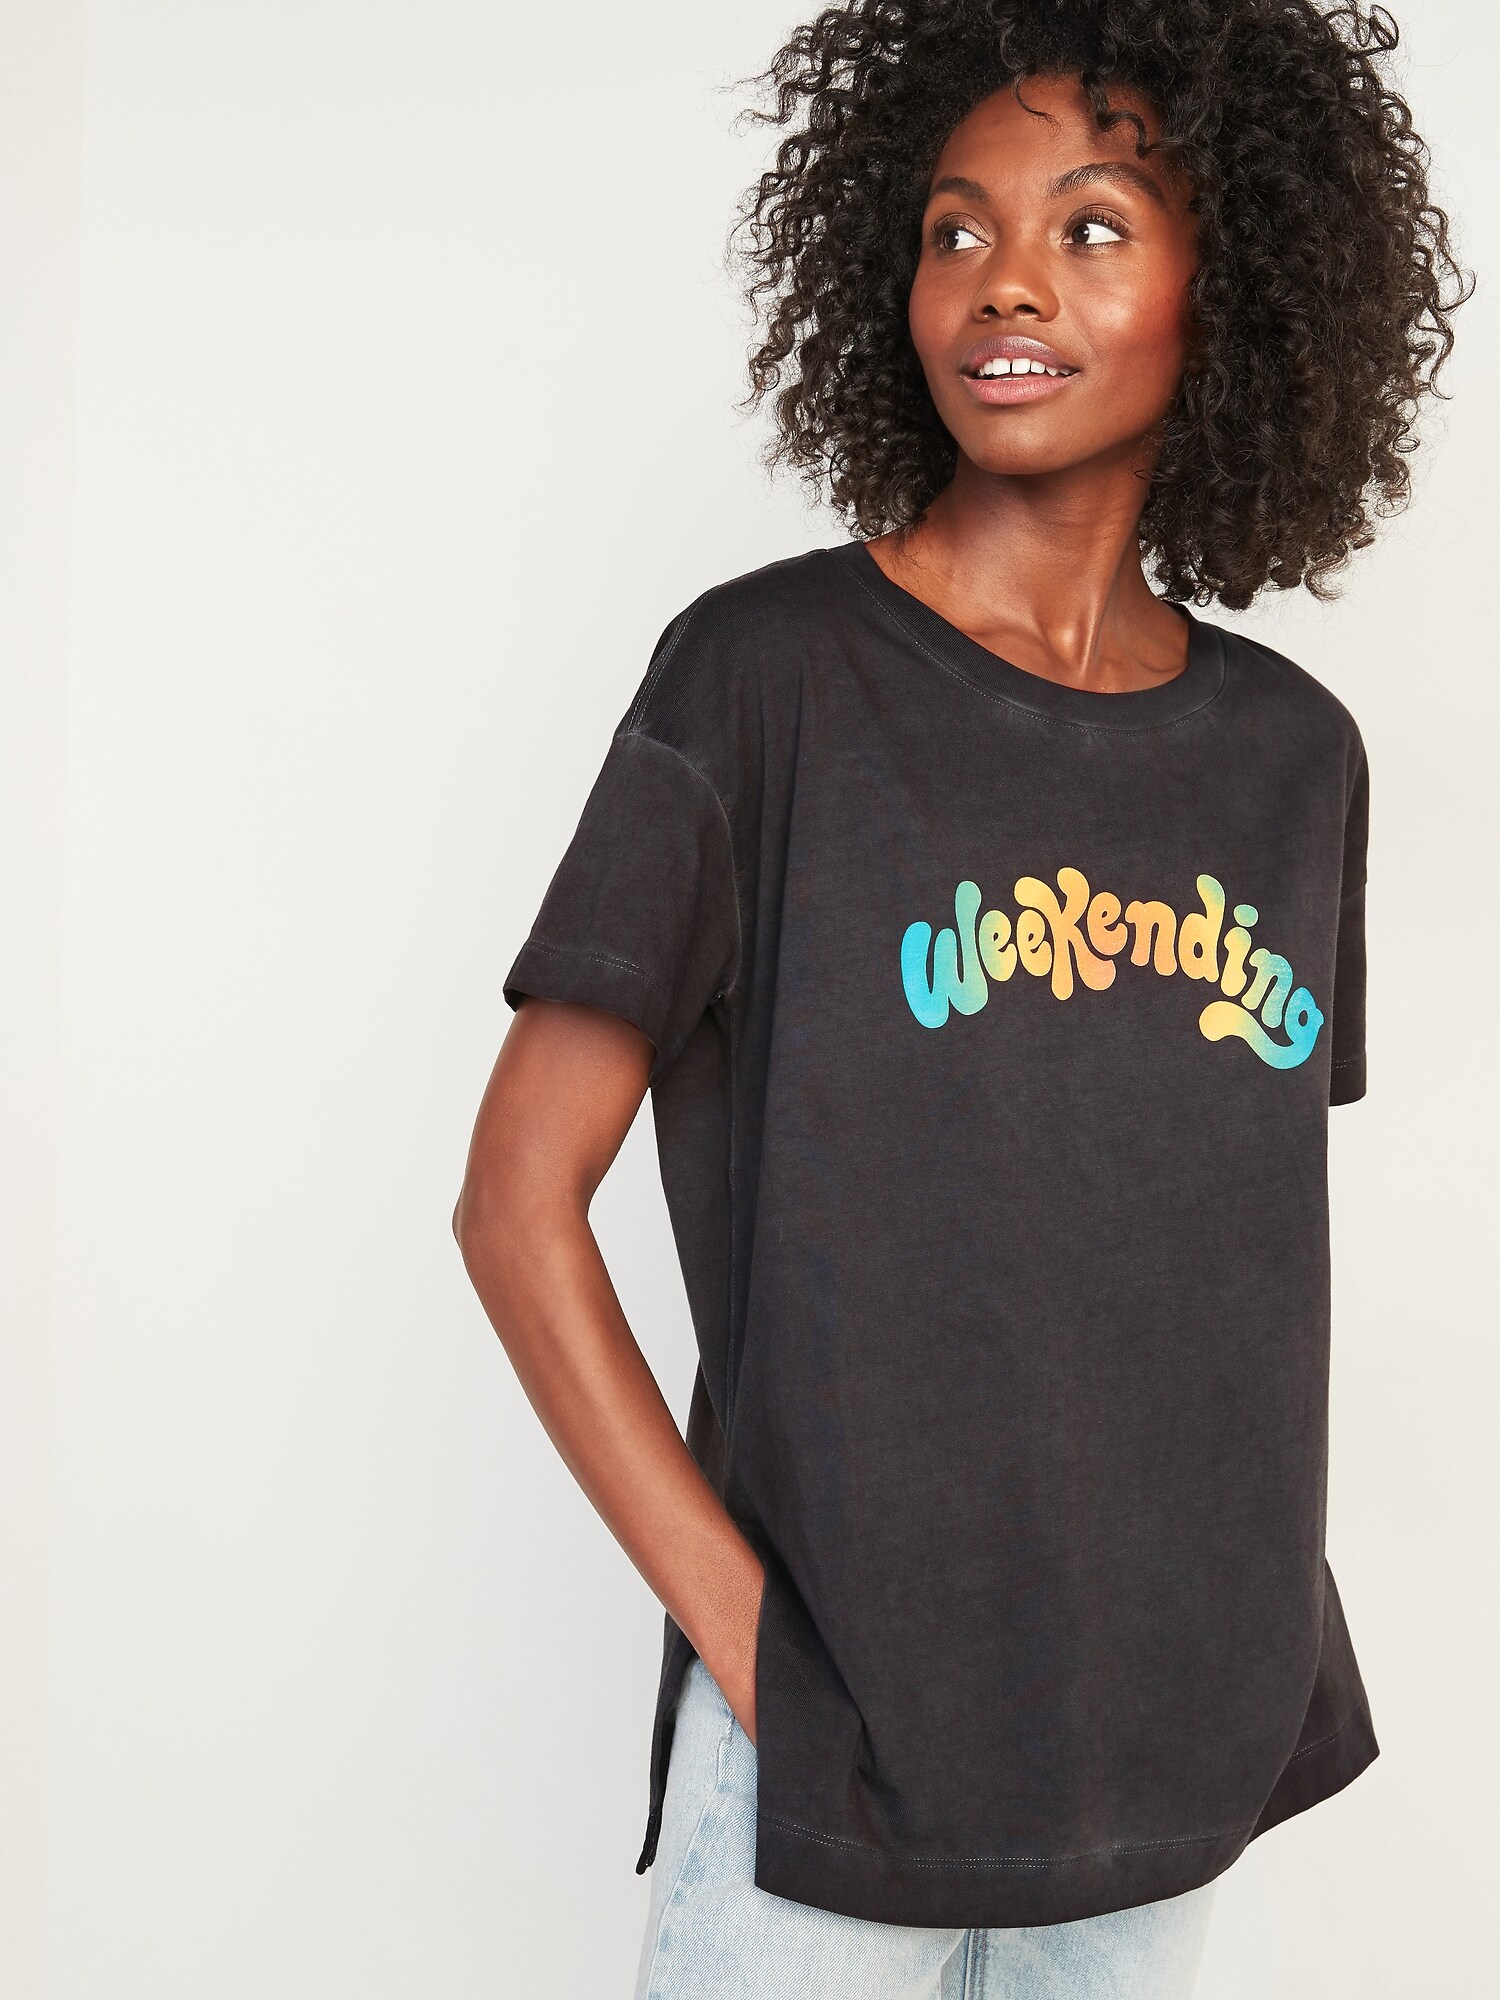 Oversized Vintage Graphic Tunic Tee for Women